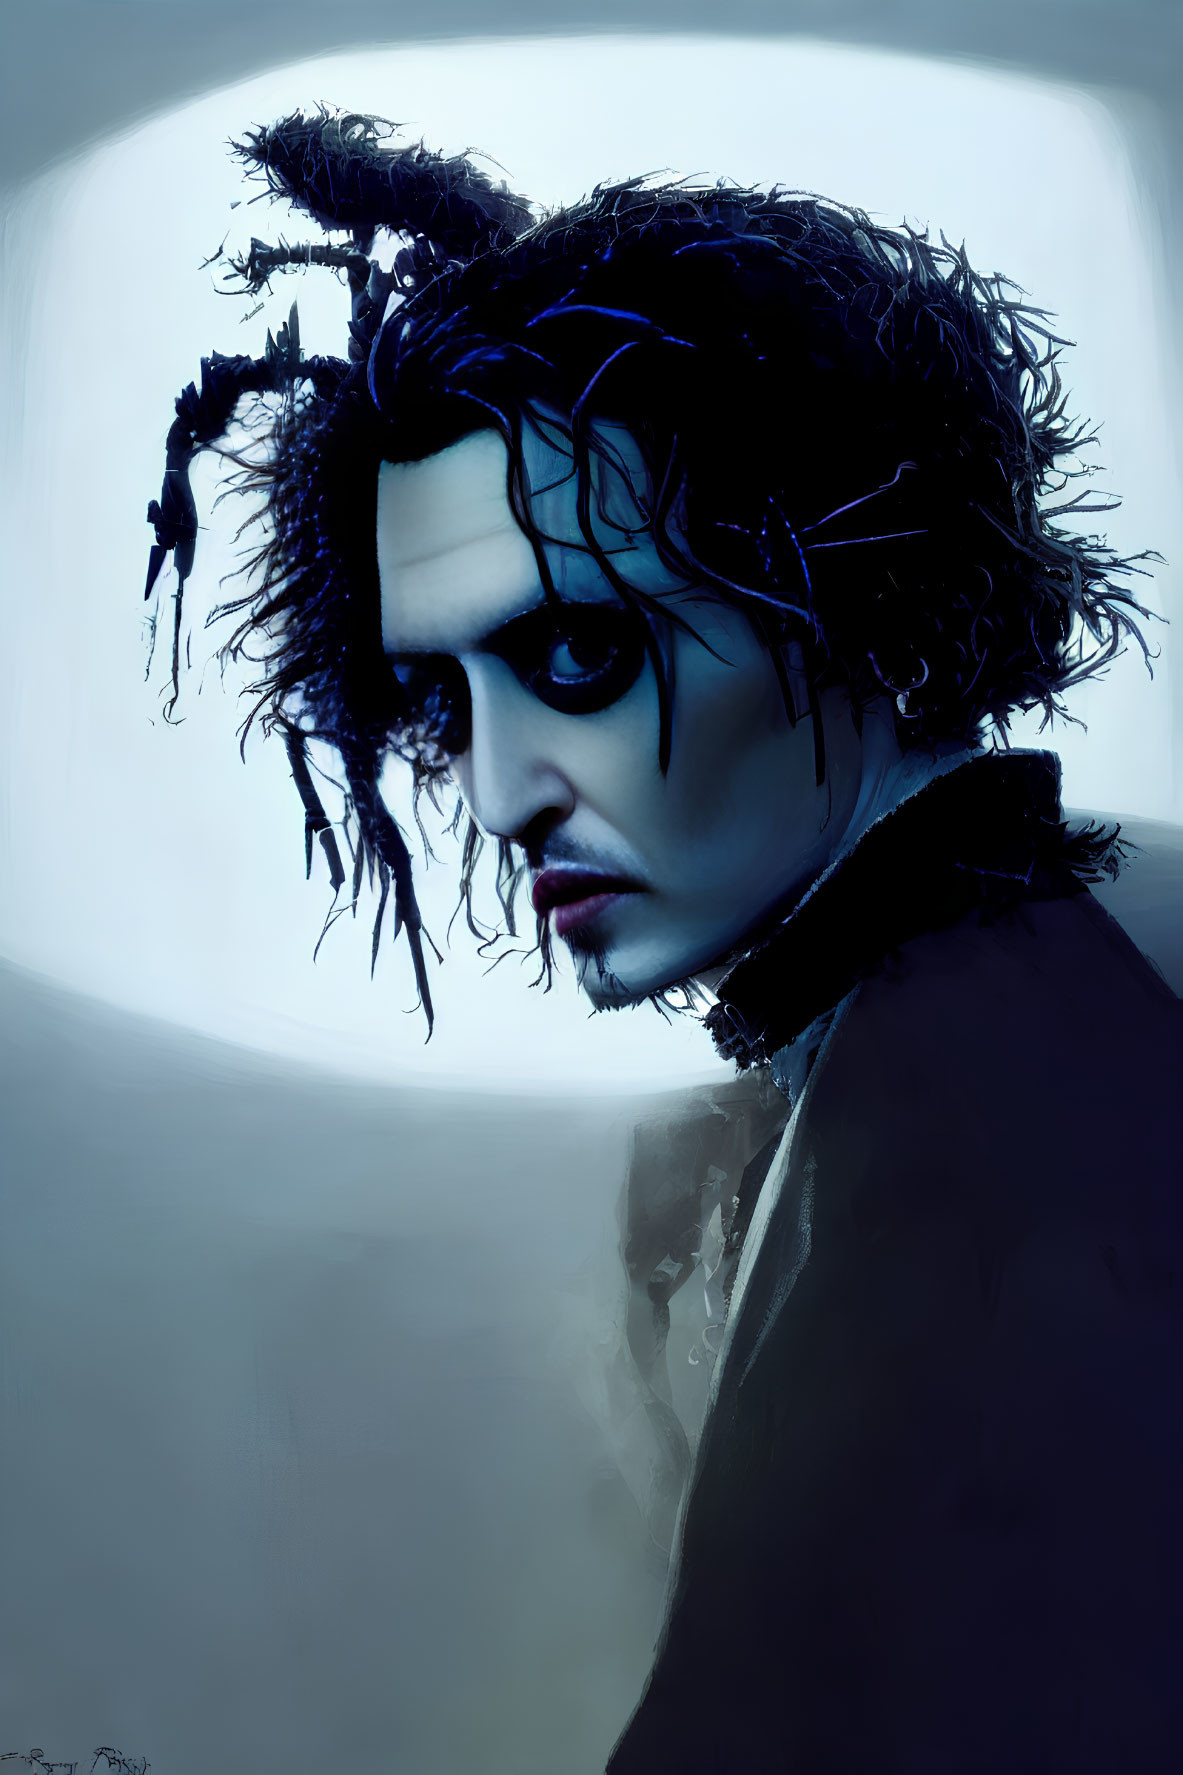 Stylized portrait of a pale man in gothic attire against foggy blue background